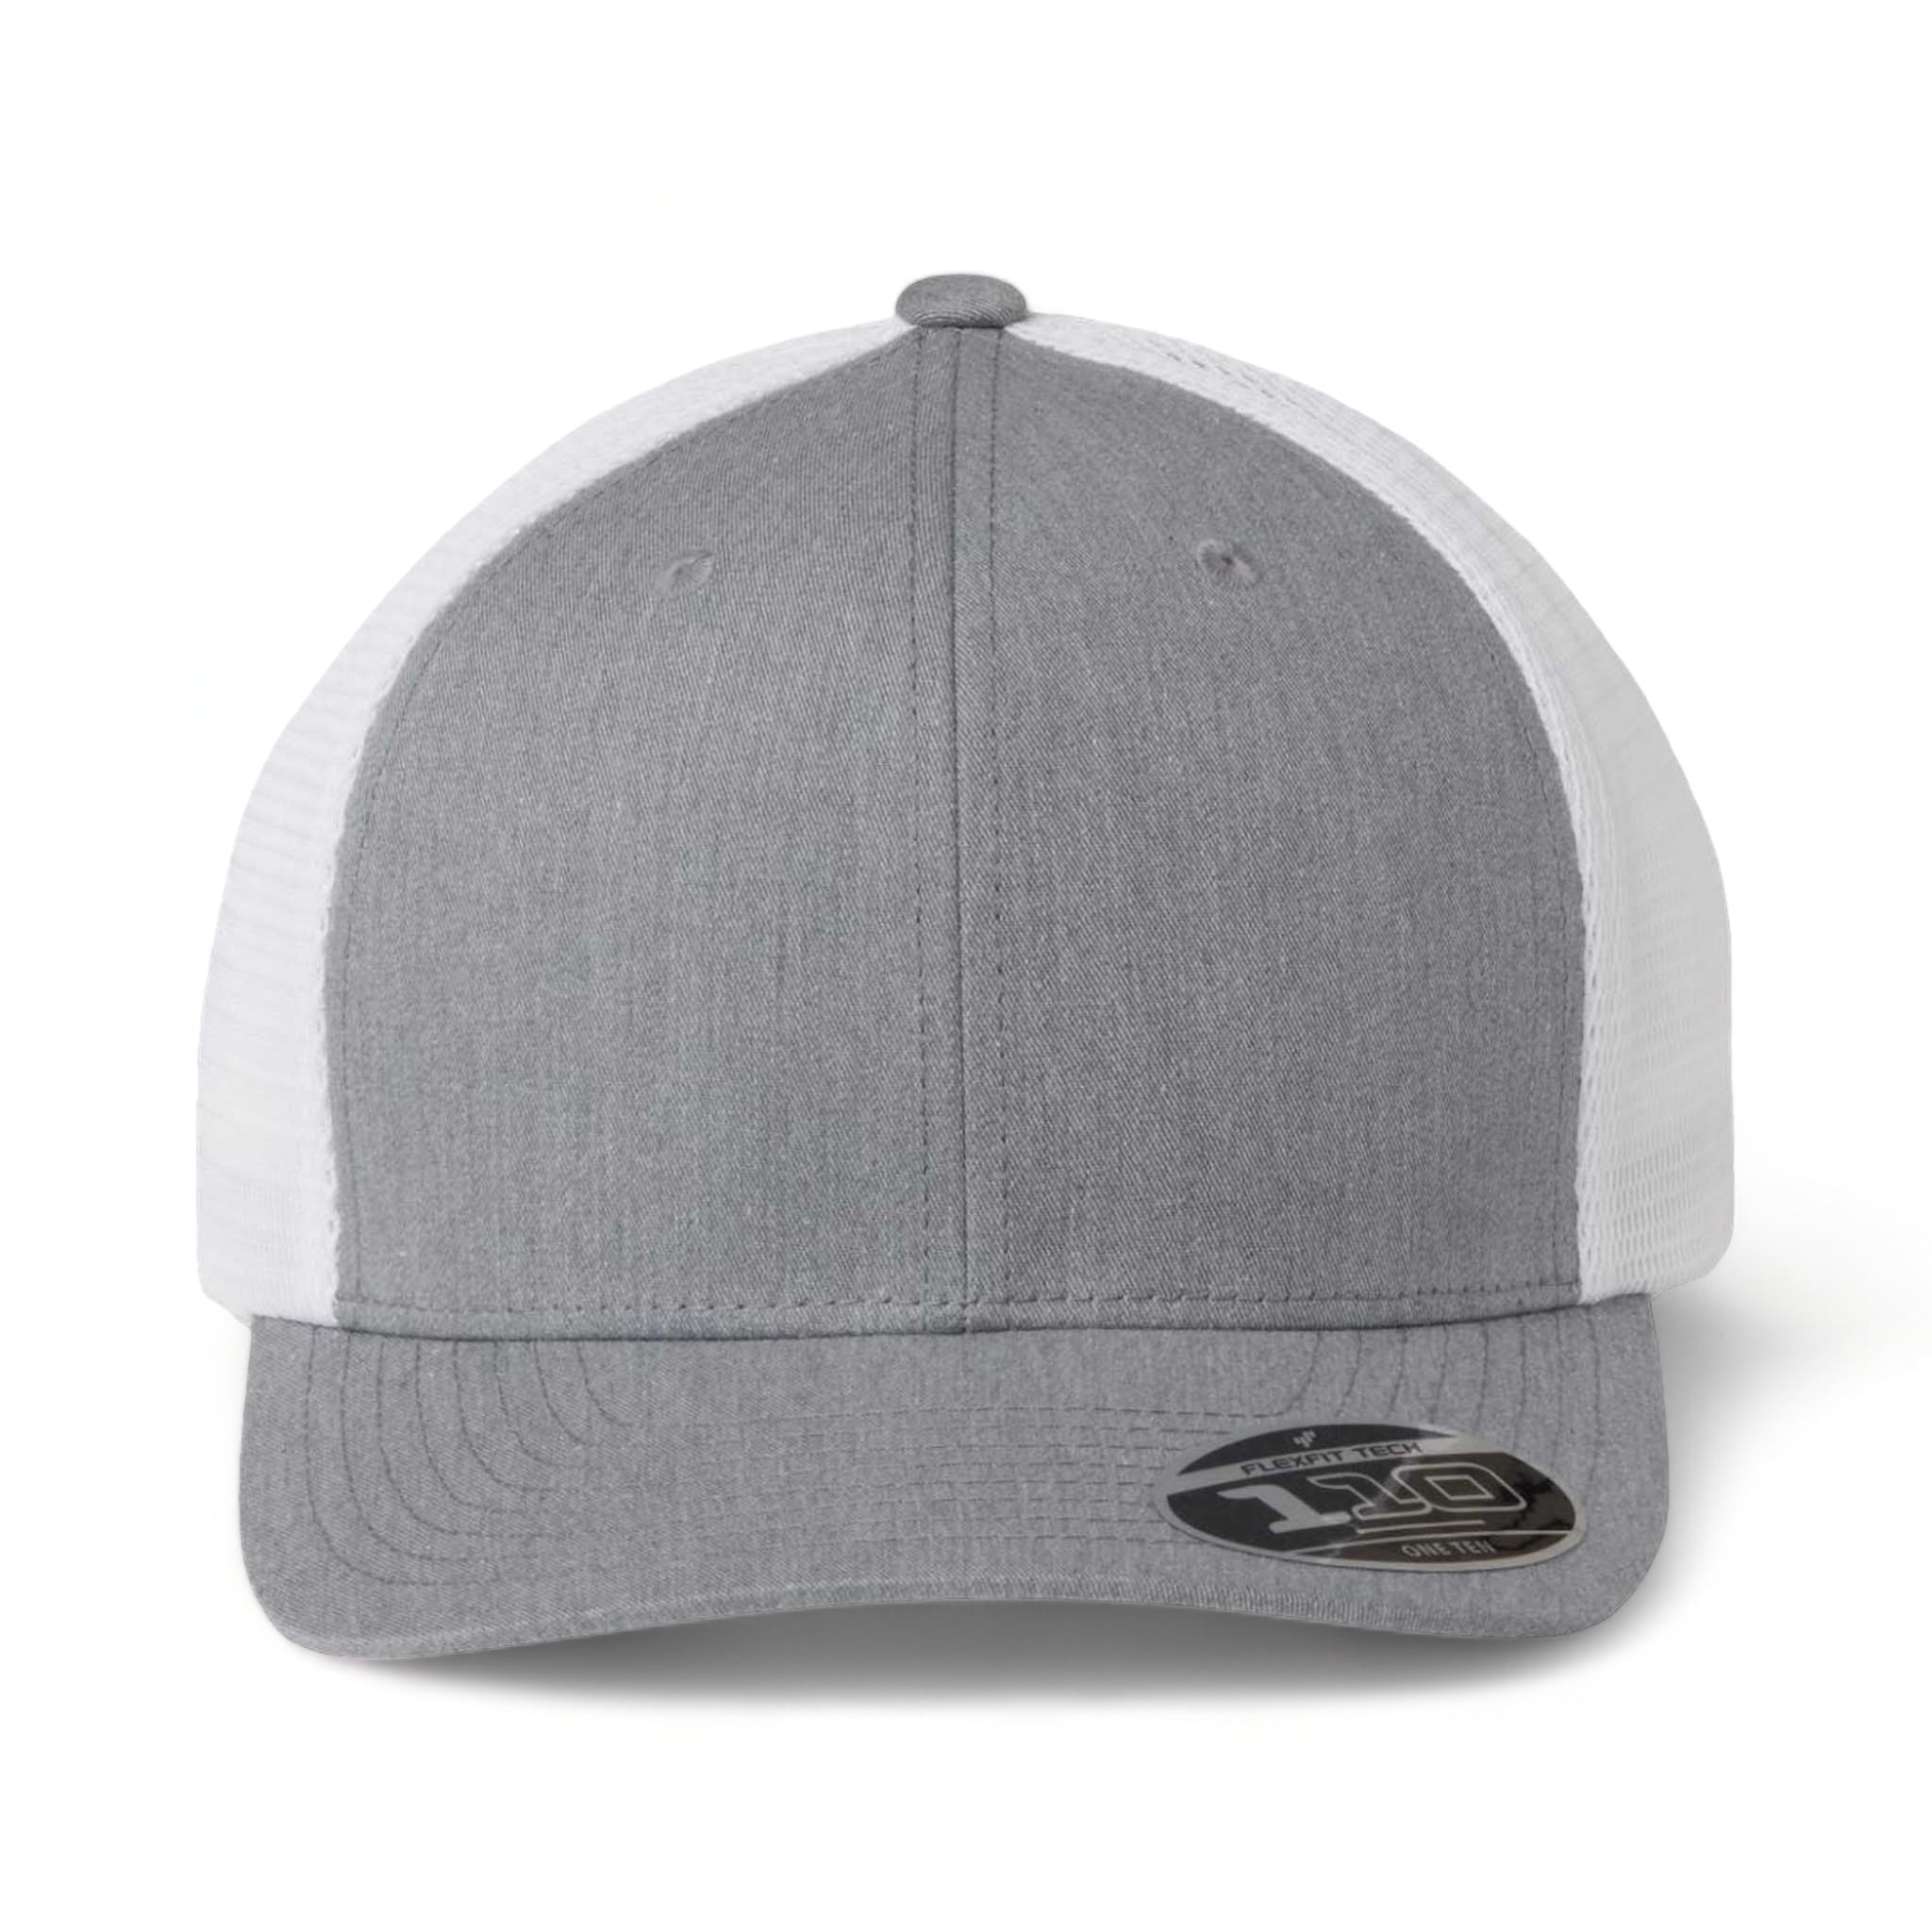 Front view of Flexfit 110M custom hat in heather grey and white